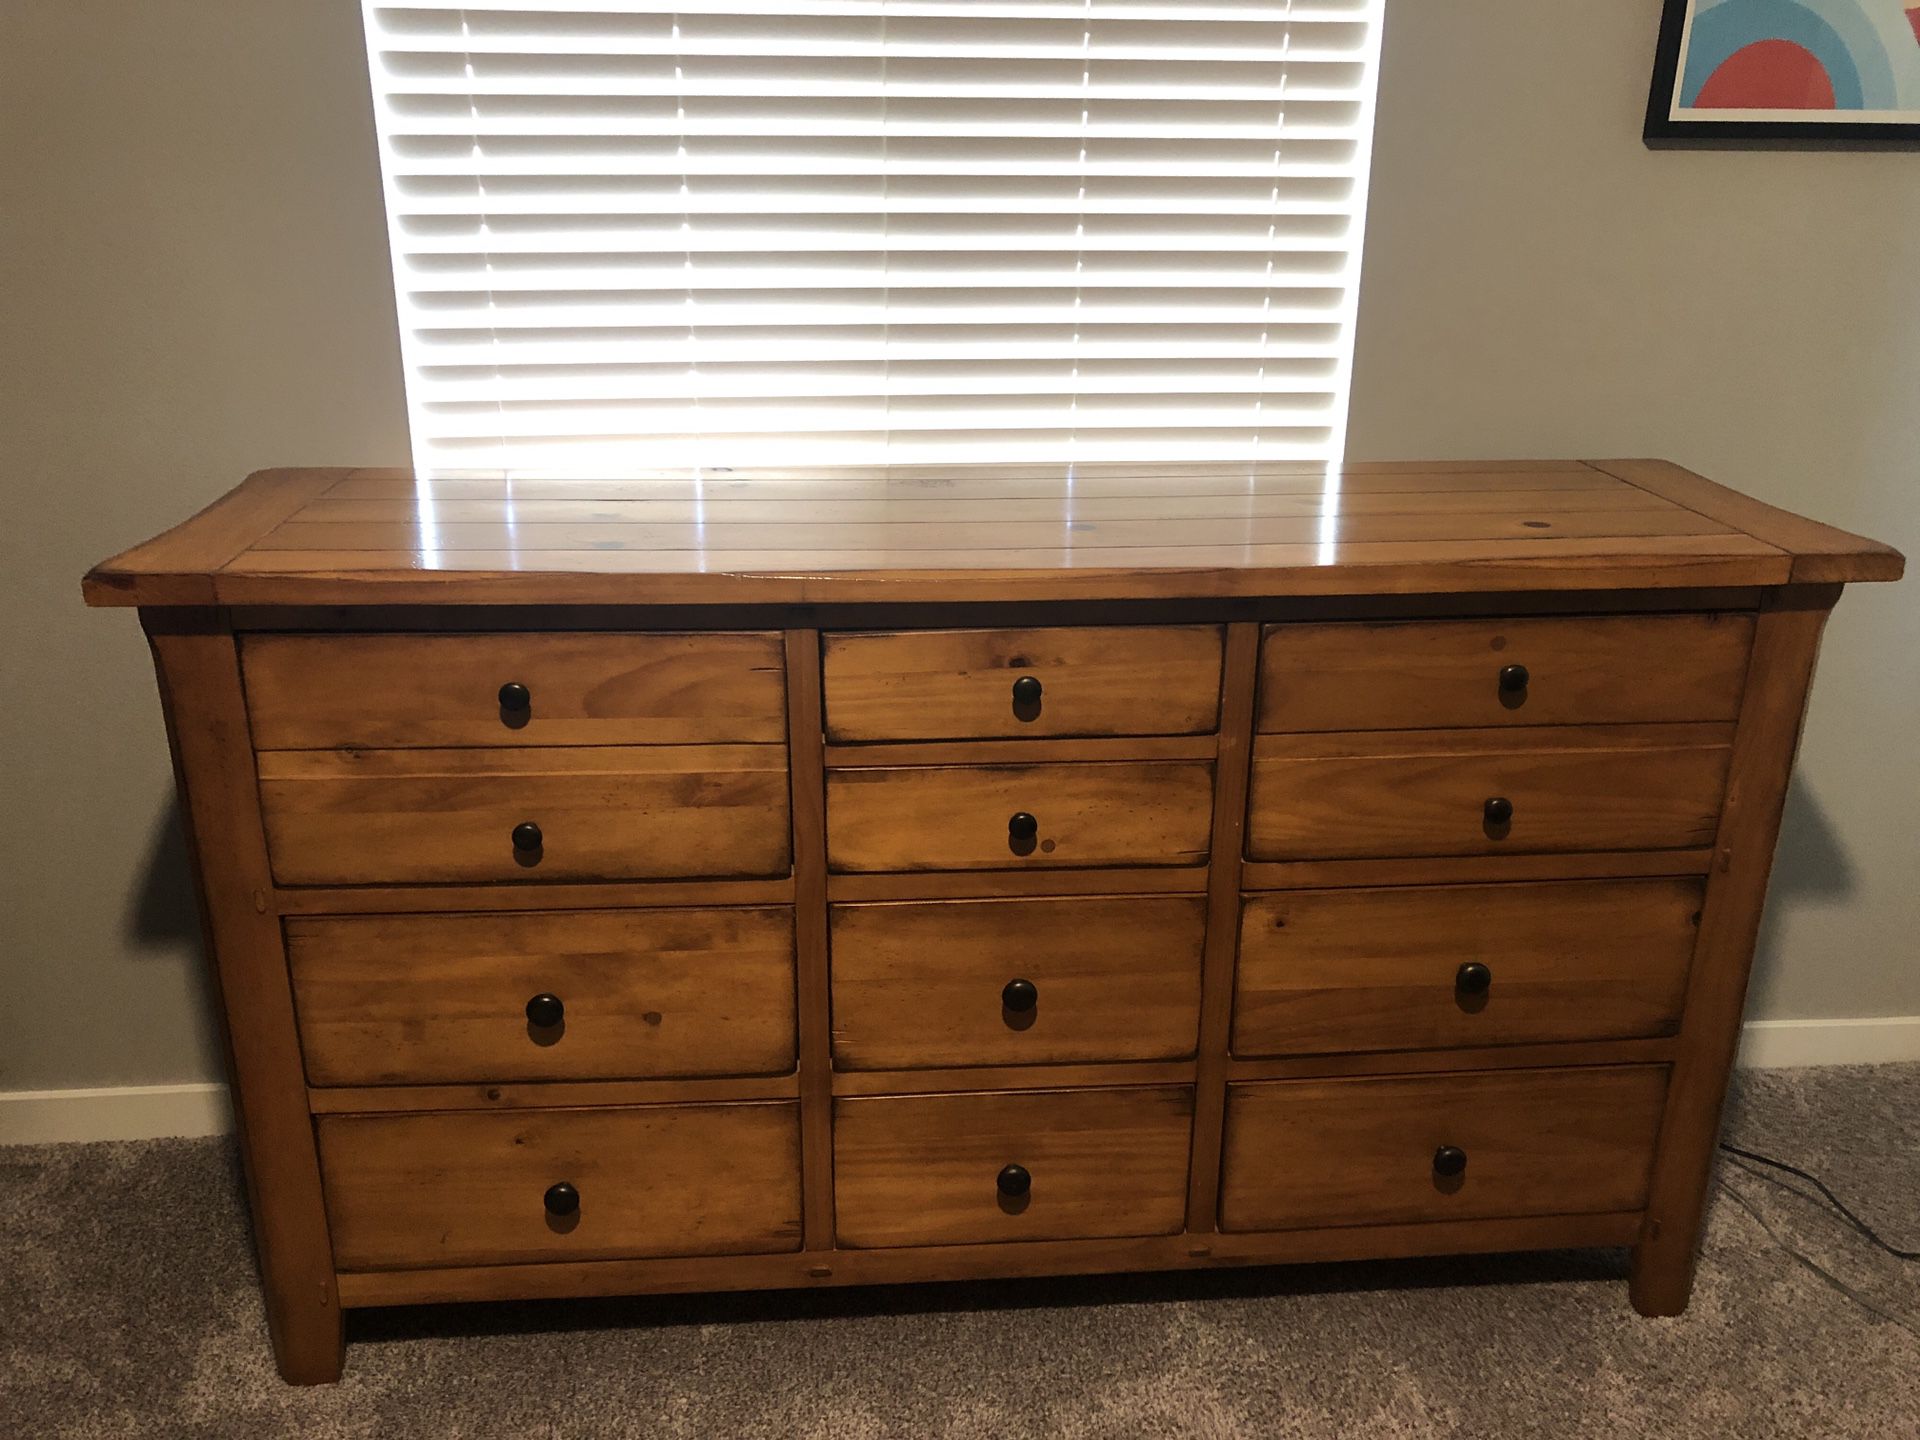 Pine wood dresser with cedar lined drawers